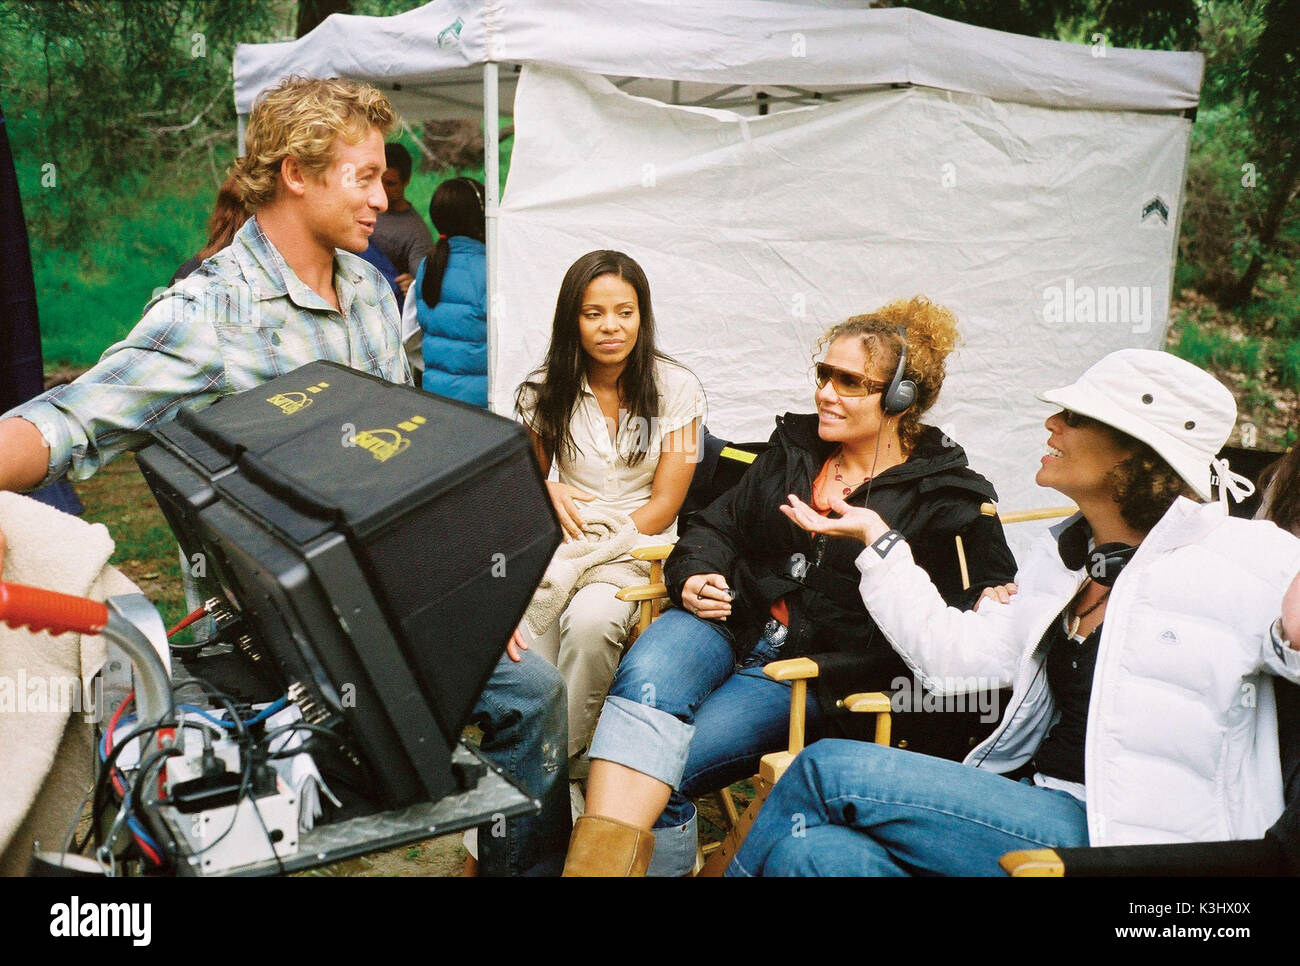 Pictured: Simon Baker , Sanaa Lathan (center left), Sanaa Hamri (center right) and Stephanie Allain (right) on the set of SOMETHING NEW, a Focus Features release. SOMETHING NEW SIMON BAKER (left), SANAA LATHAN (center left), Director SANAA HAMRI (center right), Producer STEPHANIE ALLAIN (right) Stock Photo